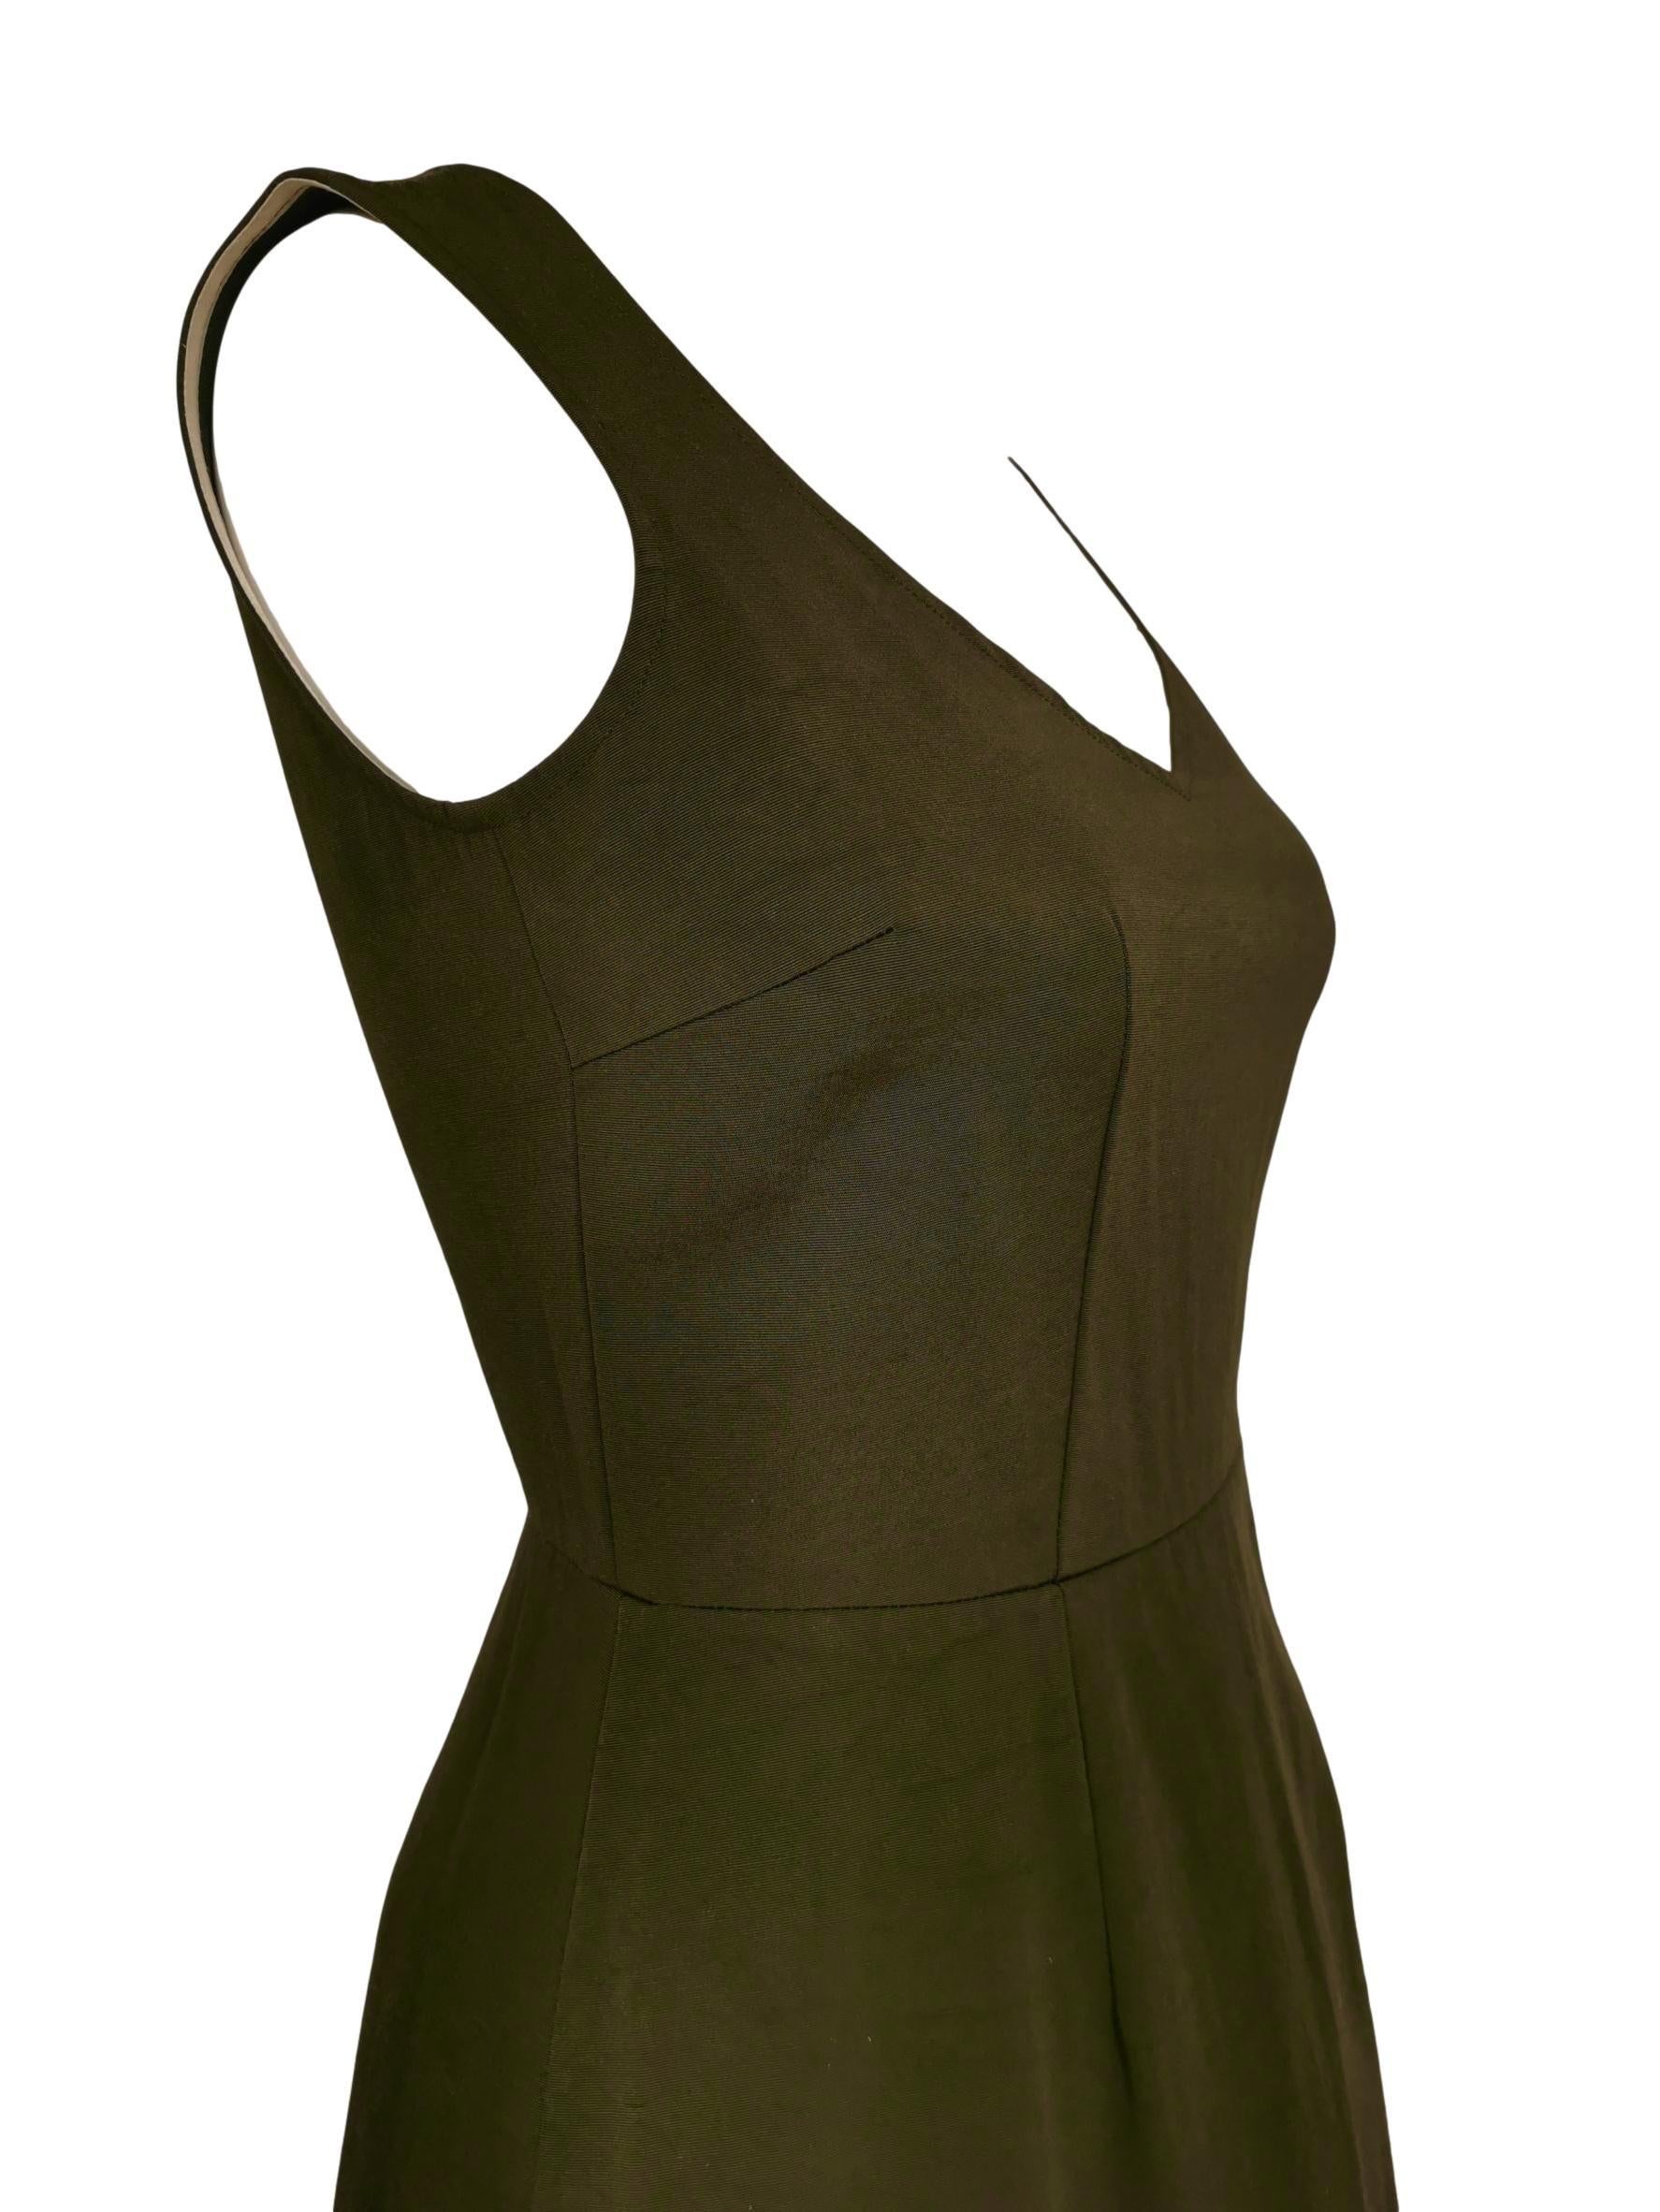 Comme des Garcons Army Green Dress AD 1999 For Sale 7